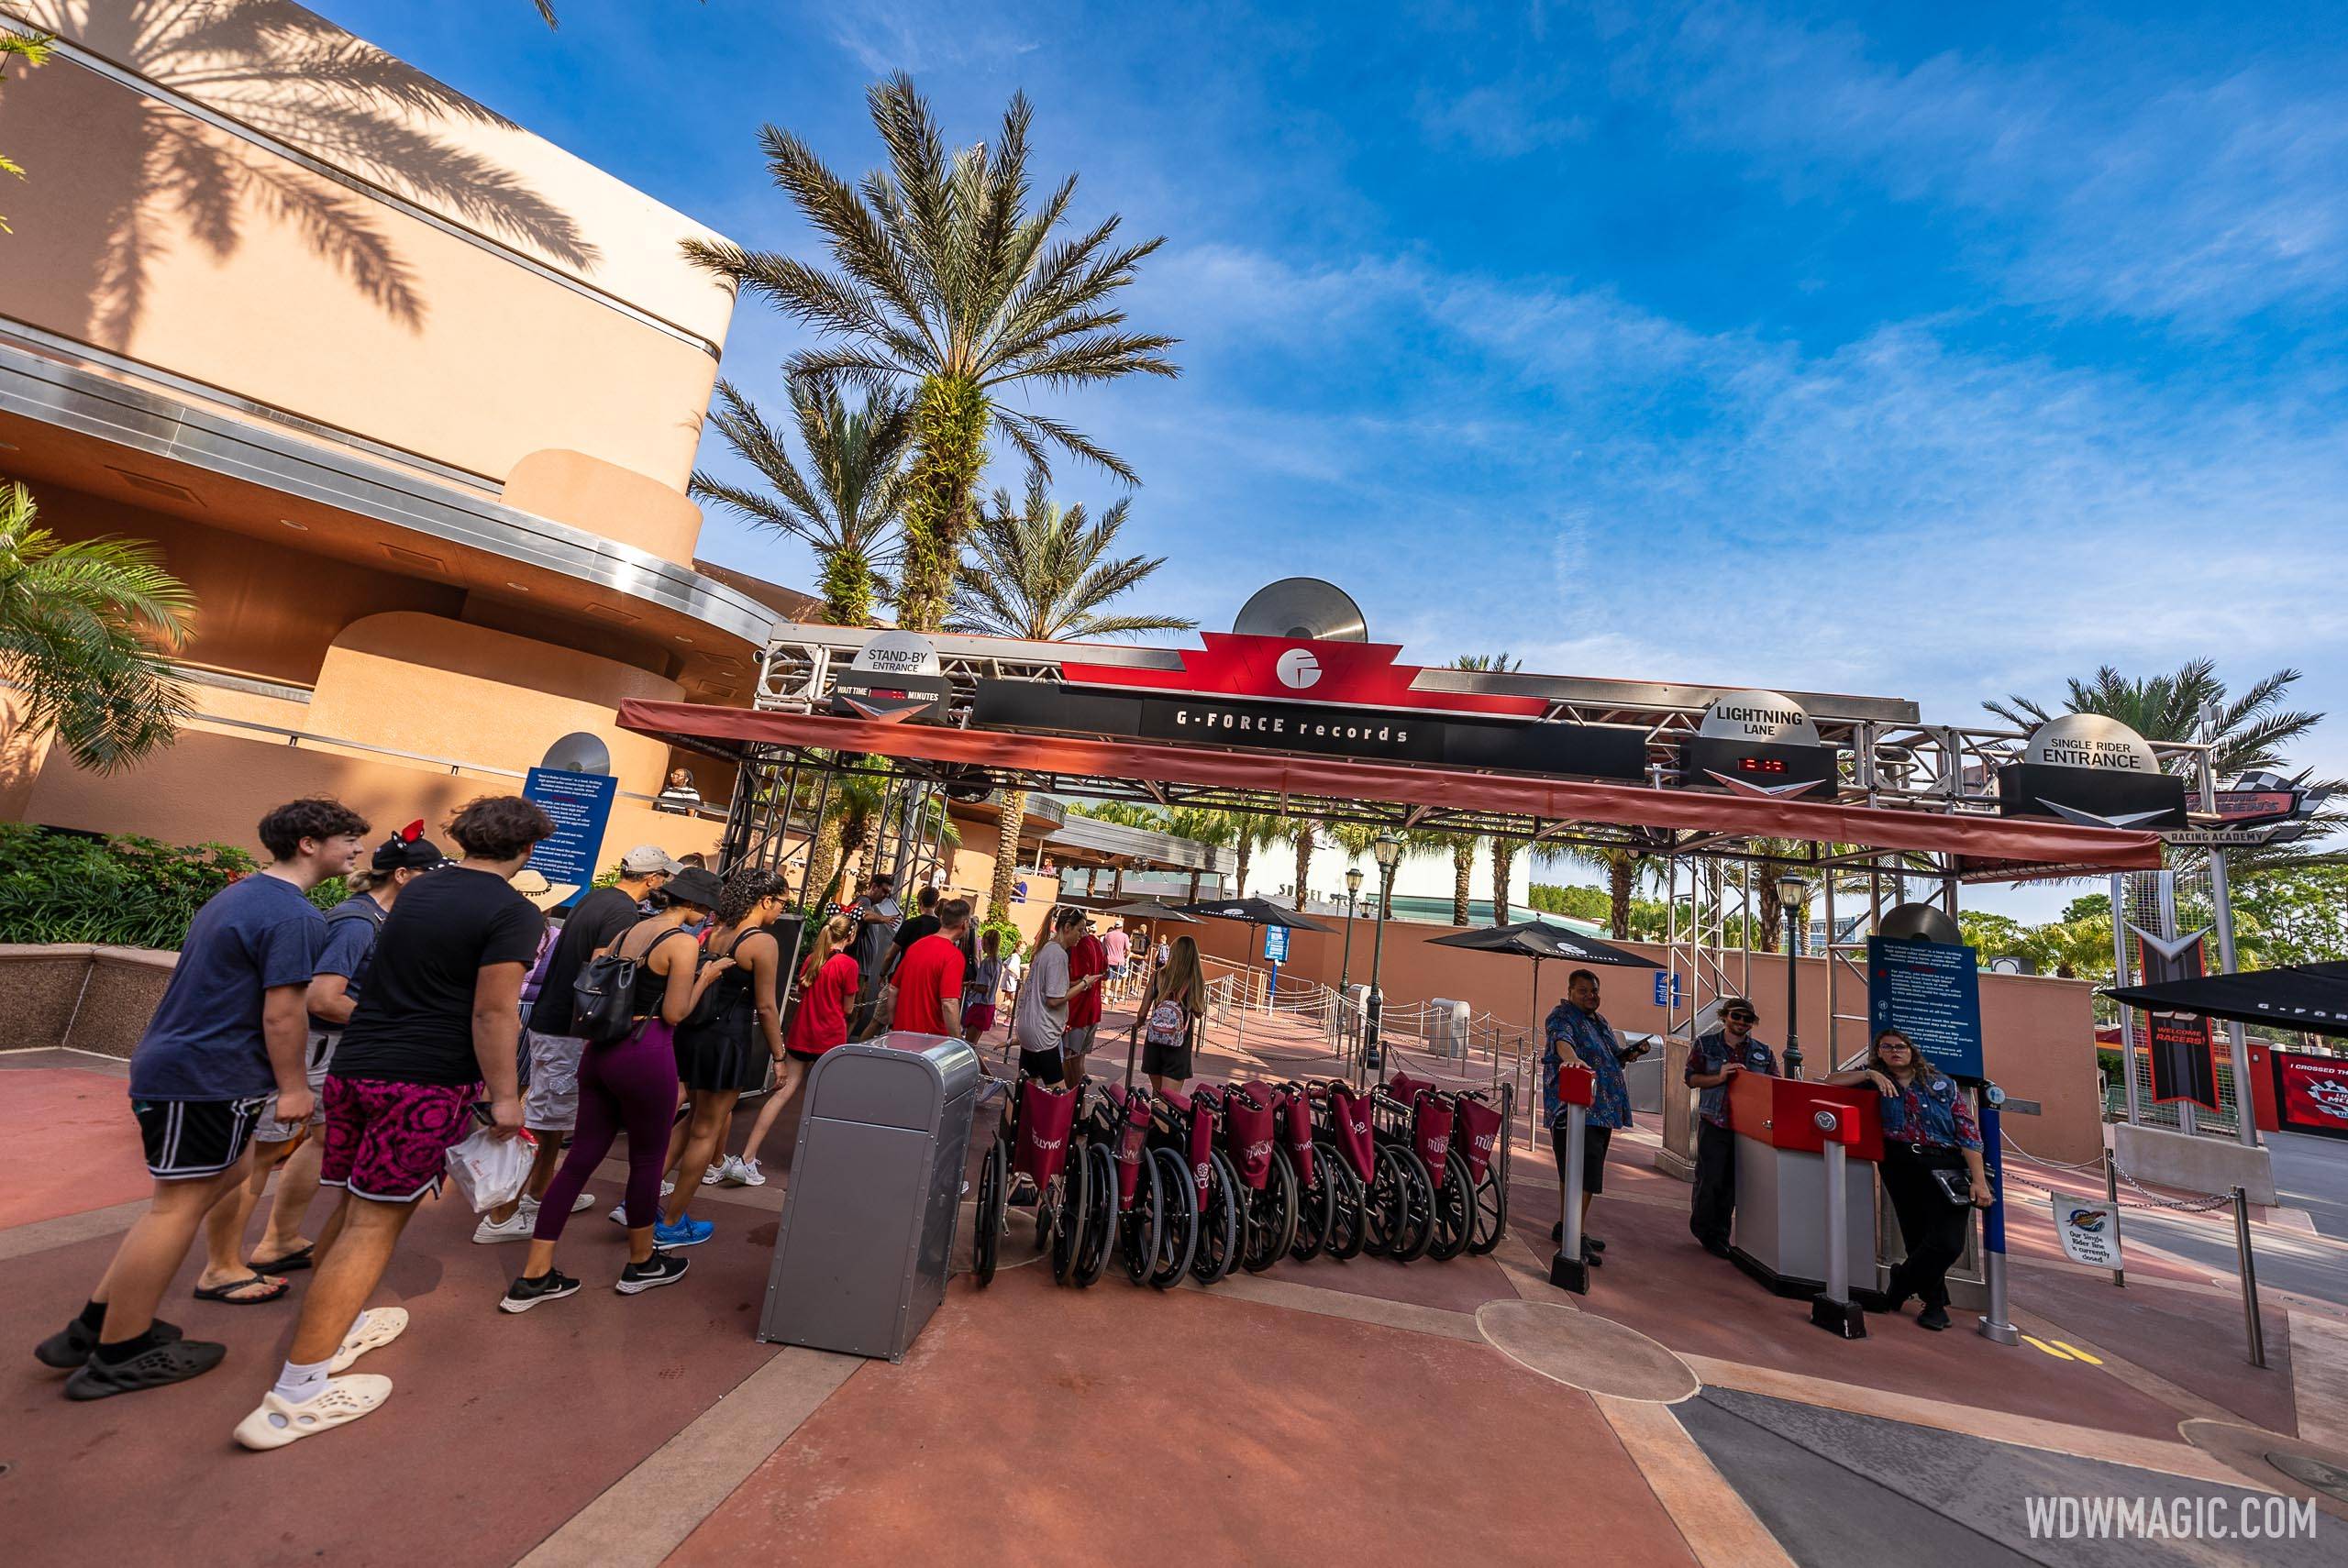 PHOTOS: Rock 'n' Roller Coaster Starring Aerosmith Rocks On with Vehicle  Cleaning & No Pre-Show at Disney's Hollywood Studios - WDW News Today